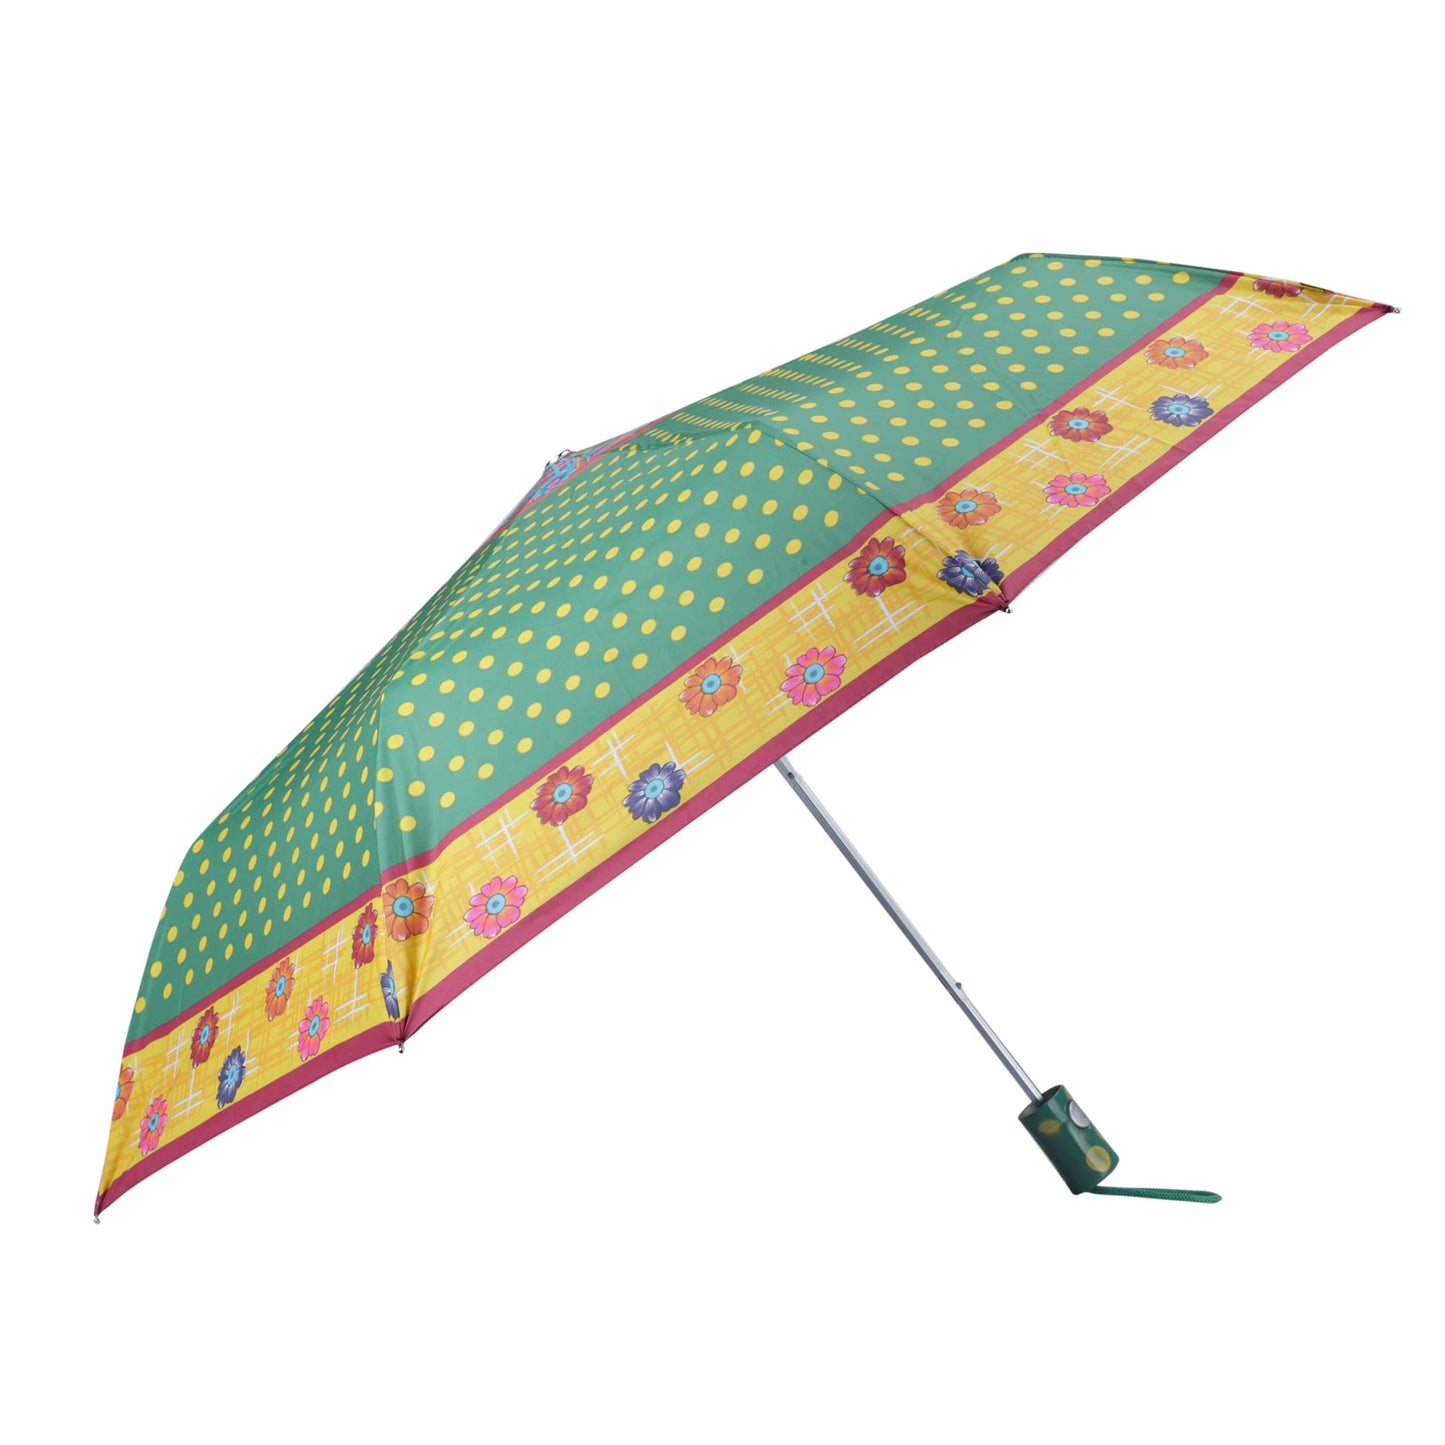 THE CLOWNFISH Umbrella Polka Dot Series 3 Fold Auto Open Waterproof Water Repellent Nylon Double Coated Silver Lined Umbrellas For Men and Women (Green with Yellow border)